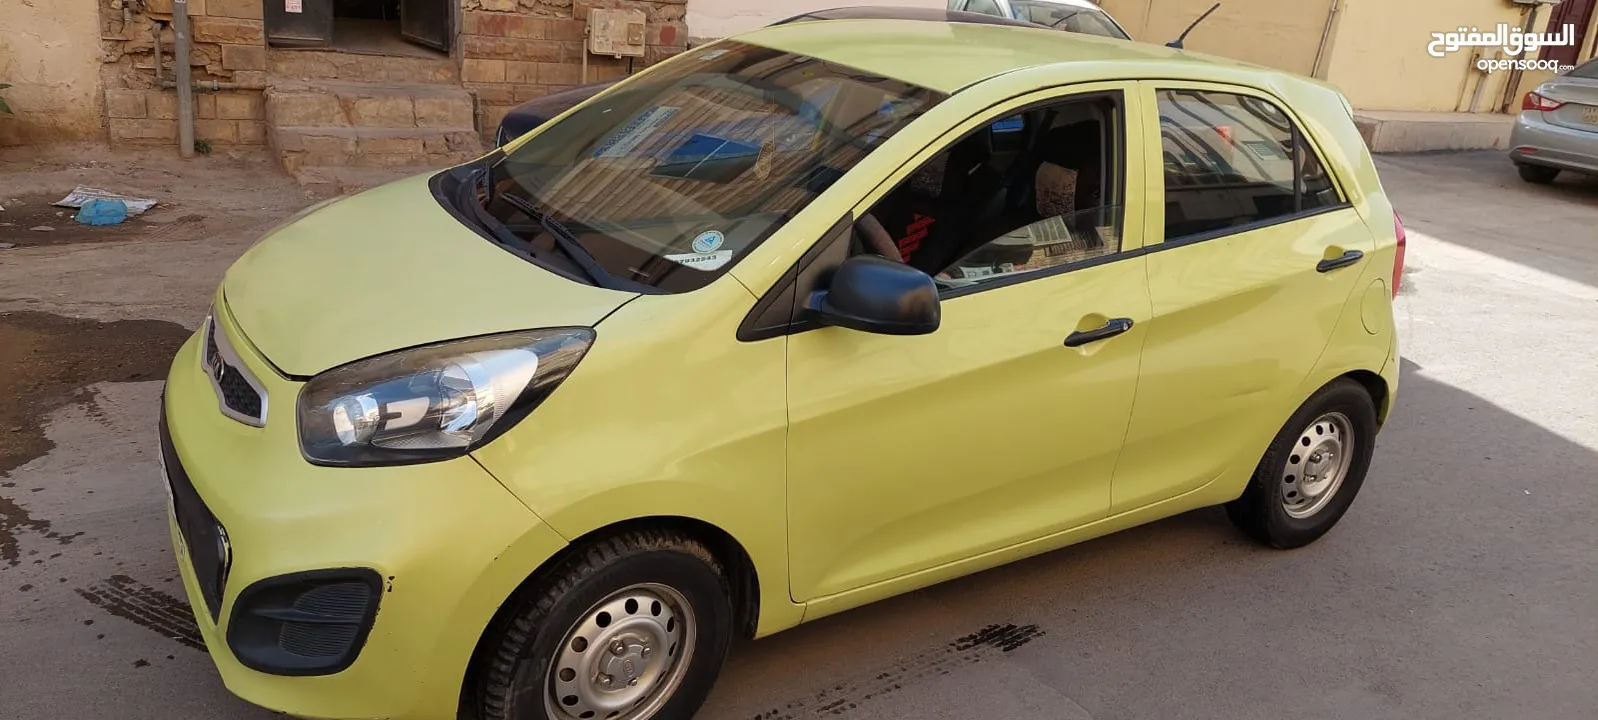 Kia picanto 2014 (purchased in March 2015) single owner well maintained